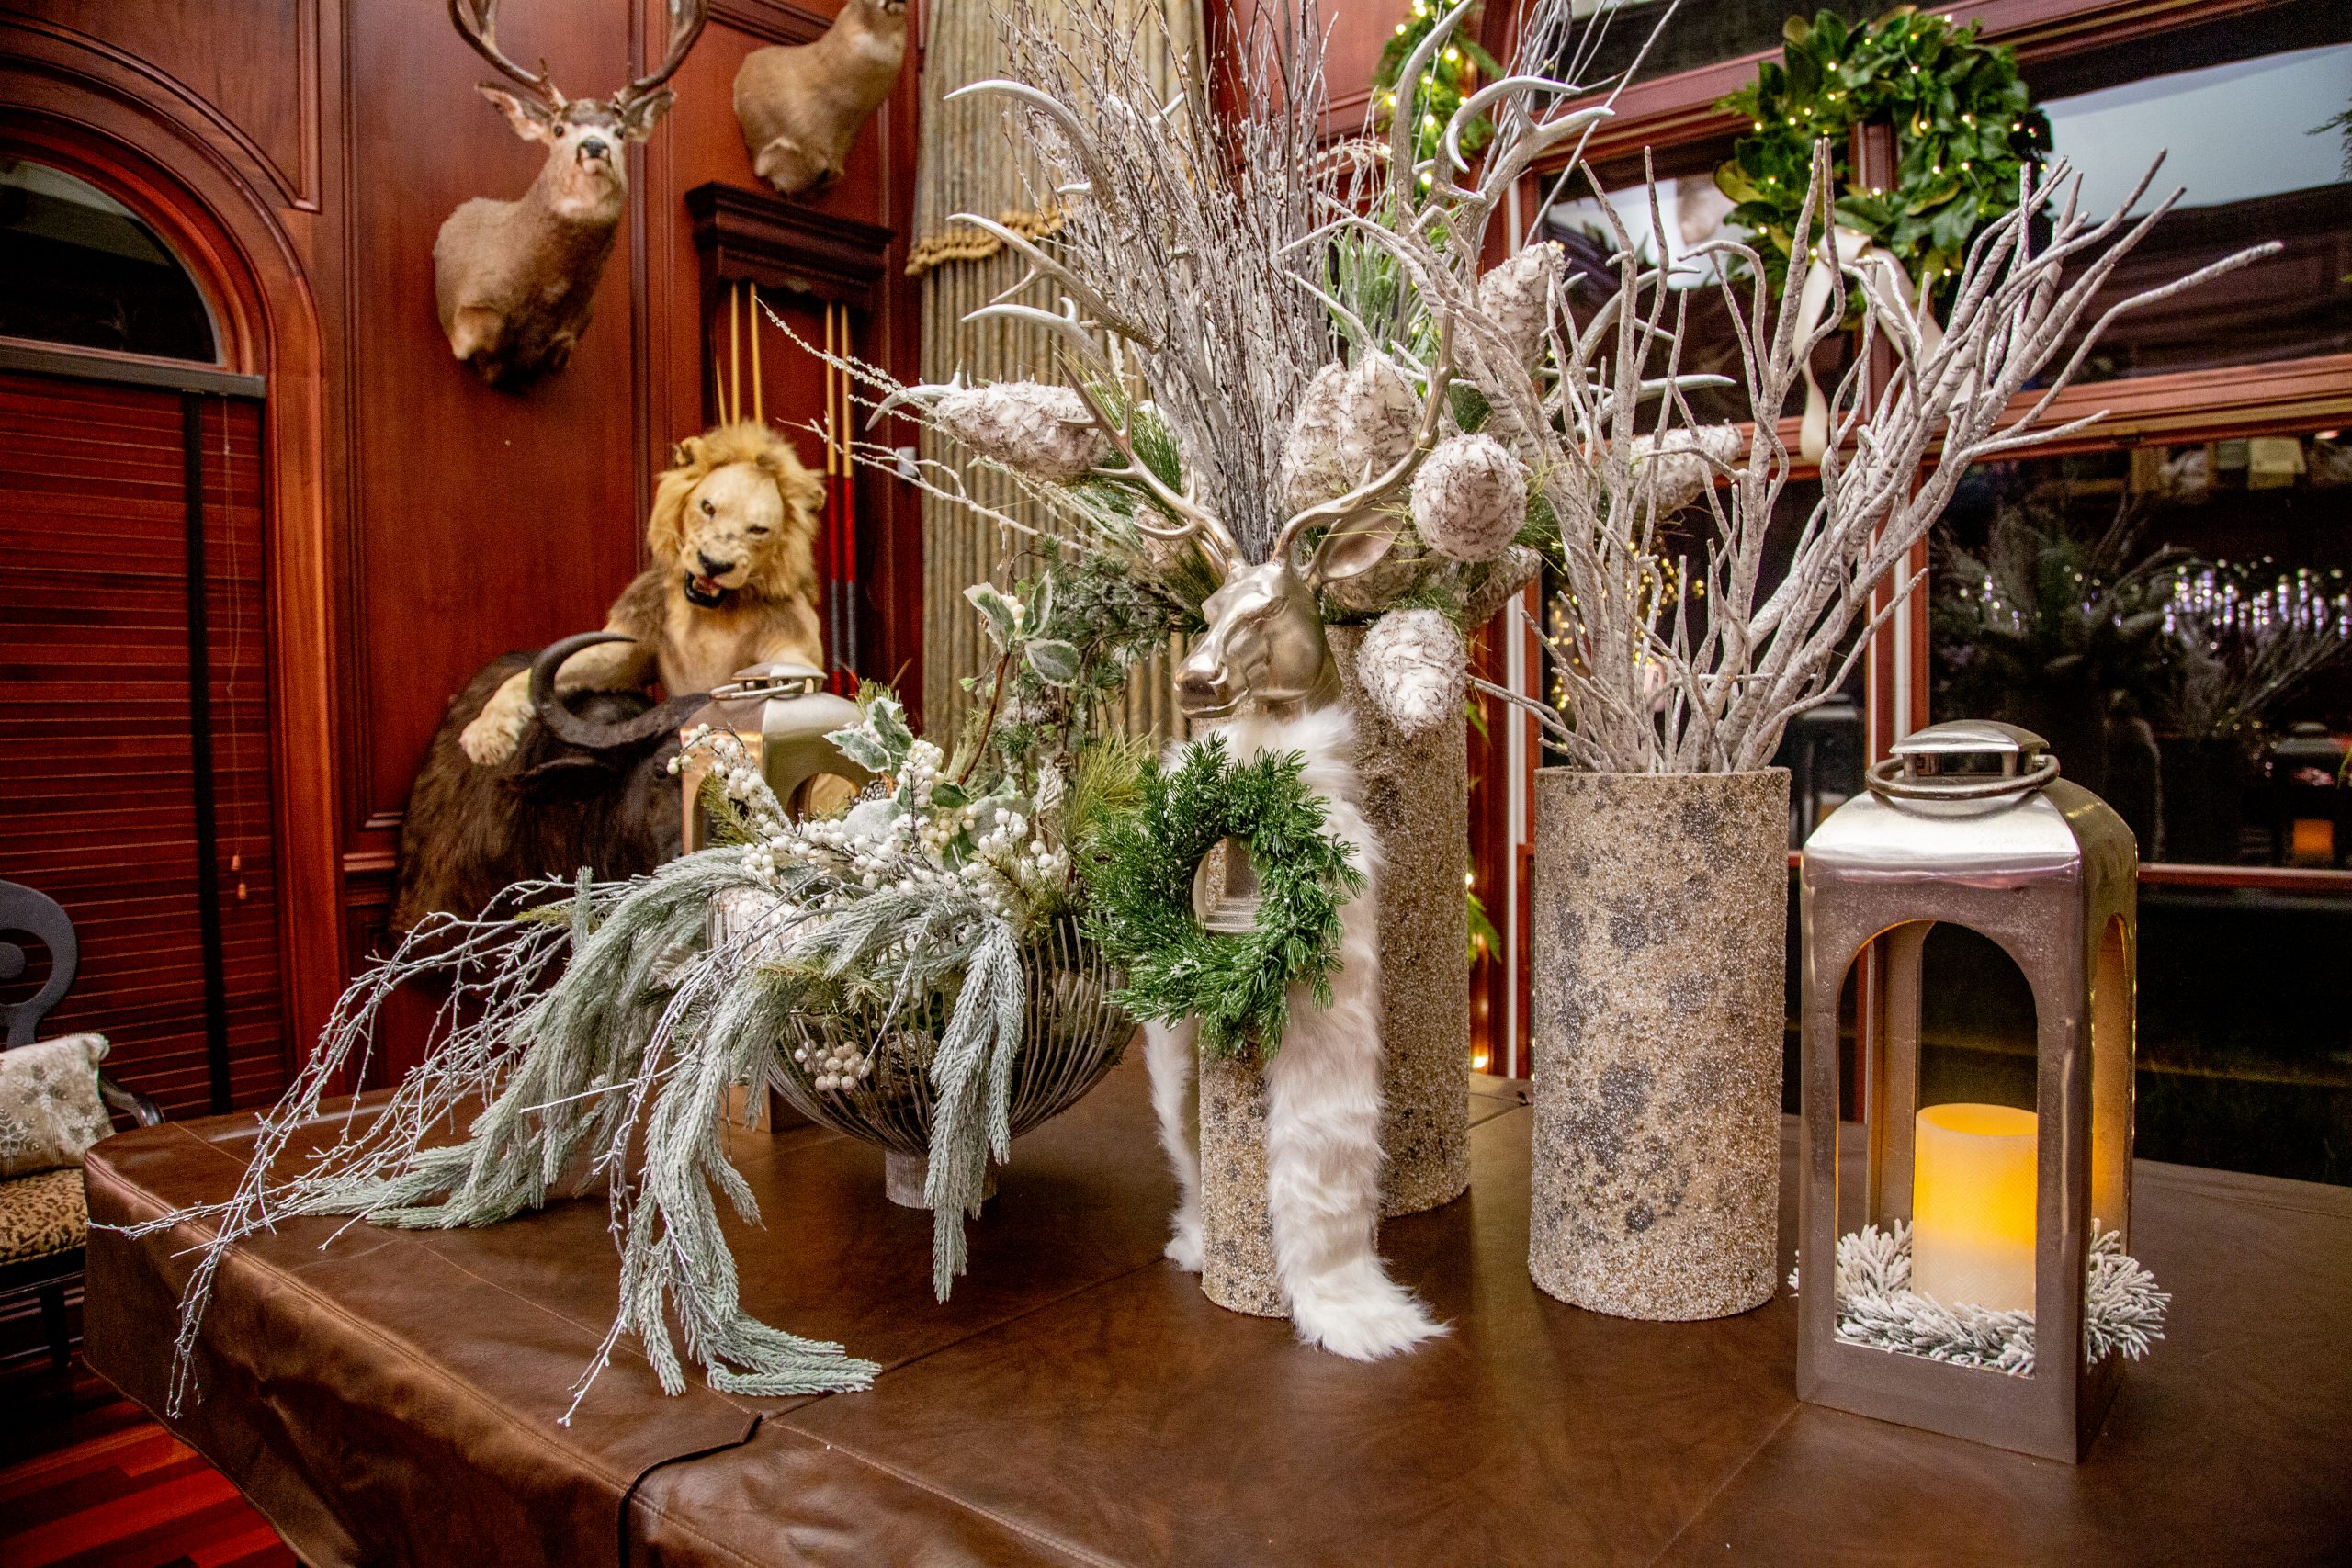 Chateau Chic POV December 2021

(Photo by Misty Leigh McElroy)
[date}